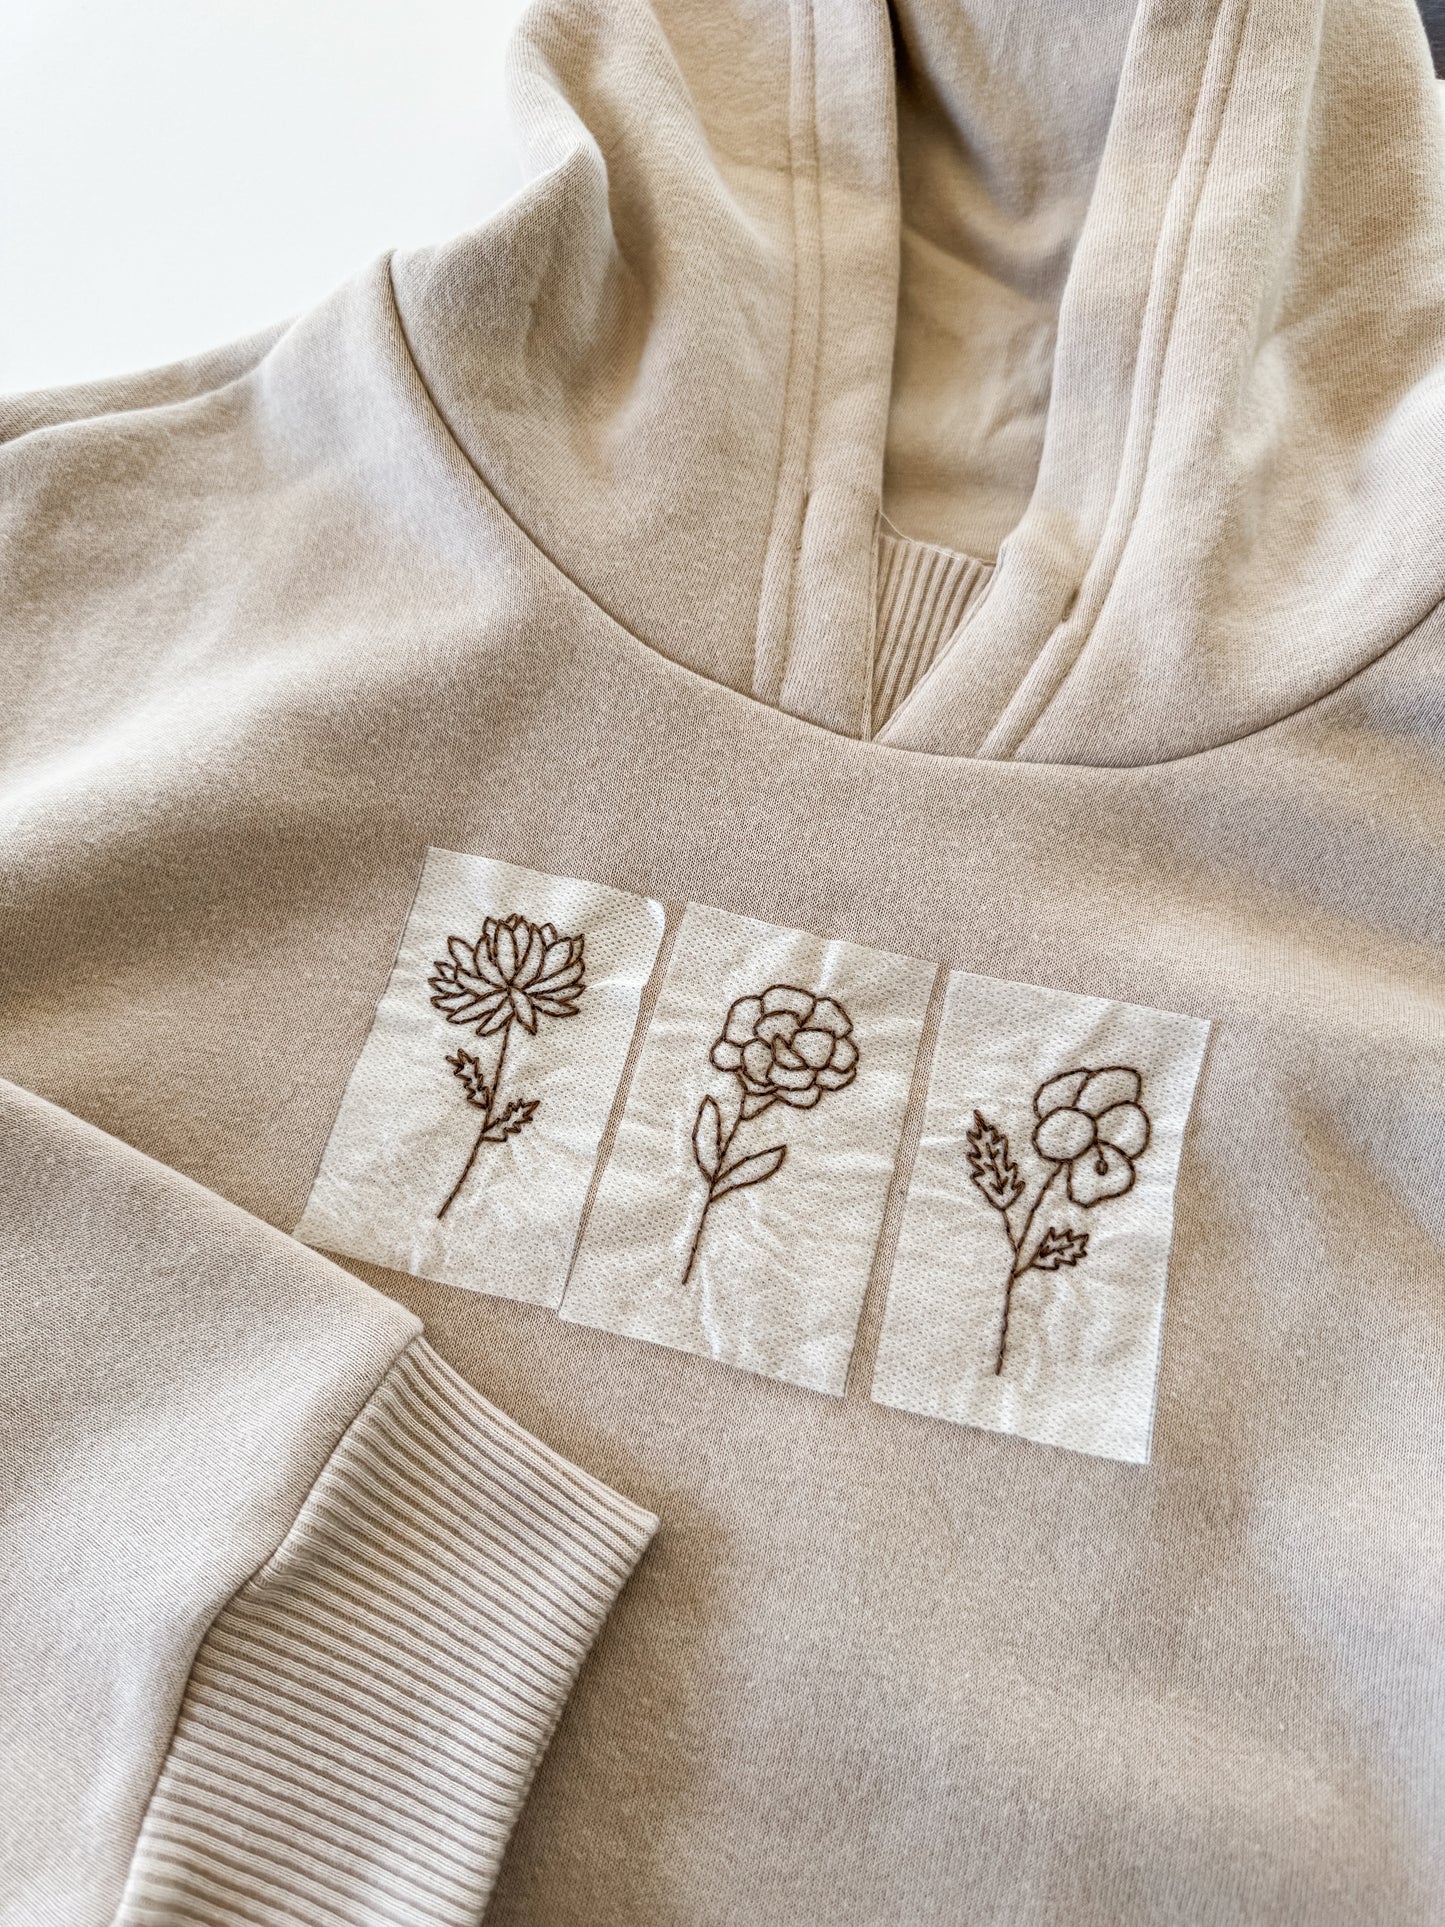 Birth Month Flowers (All 25) PDF Embroidery Pattern